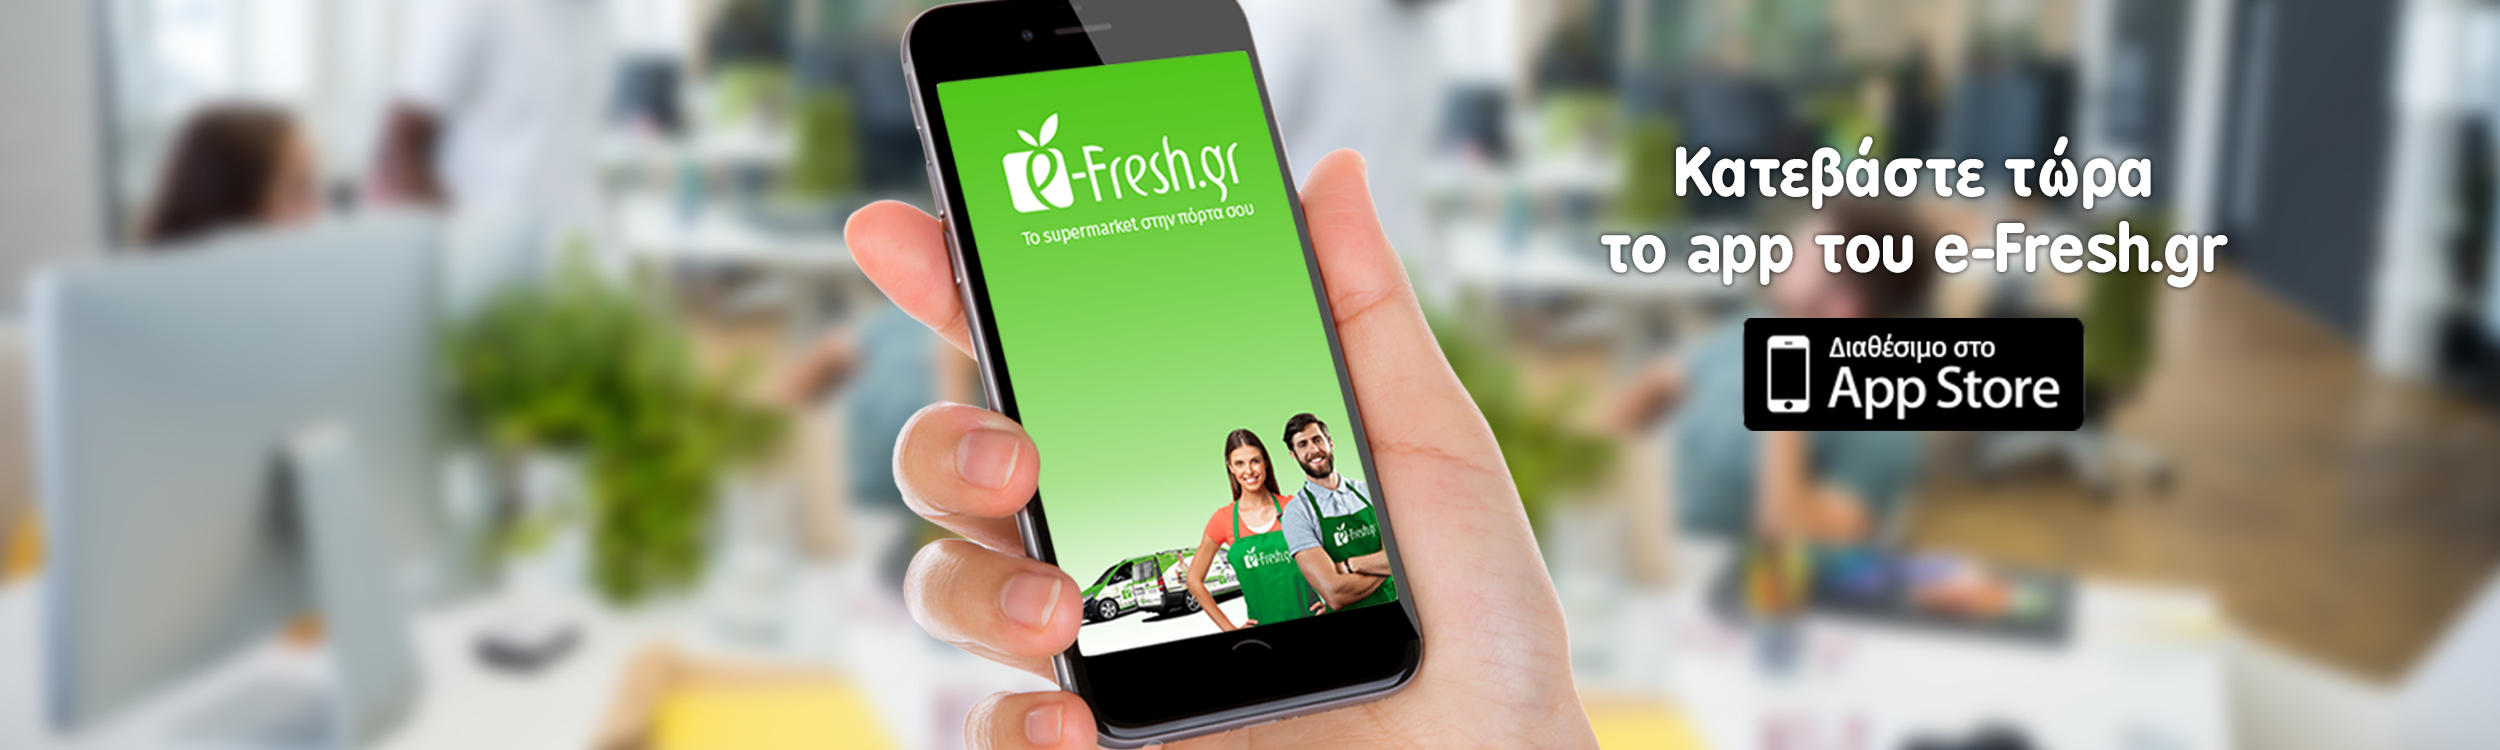 The e-Fresh.gr app for iOS and Android makes grocery shopping even easier.